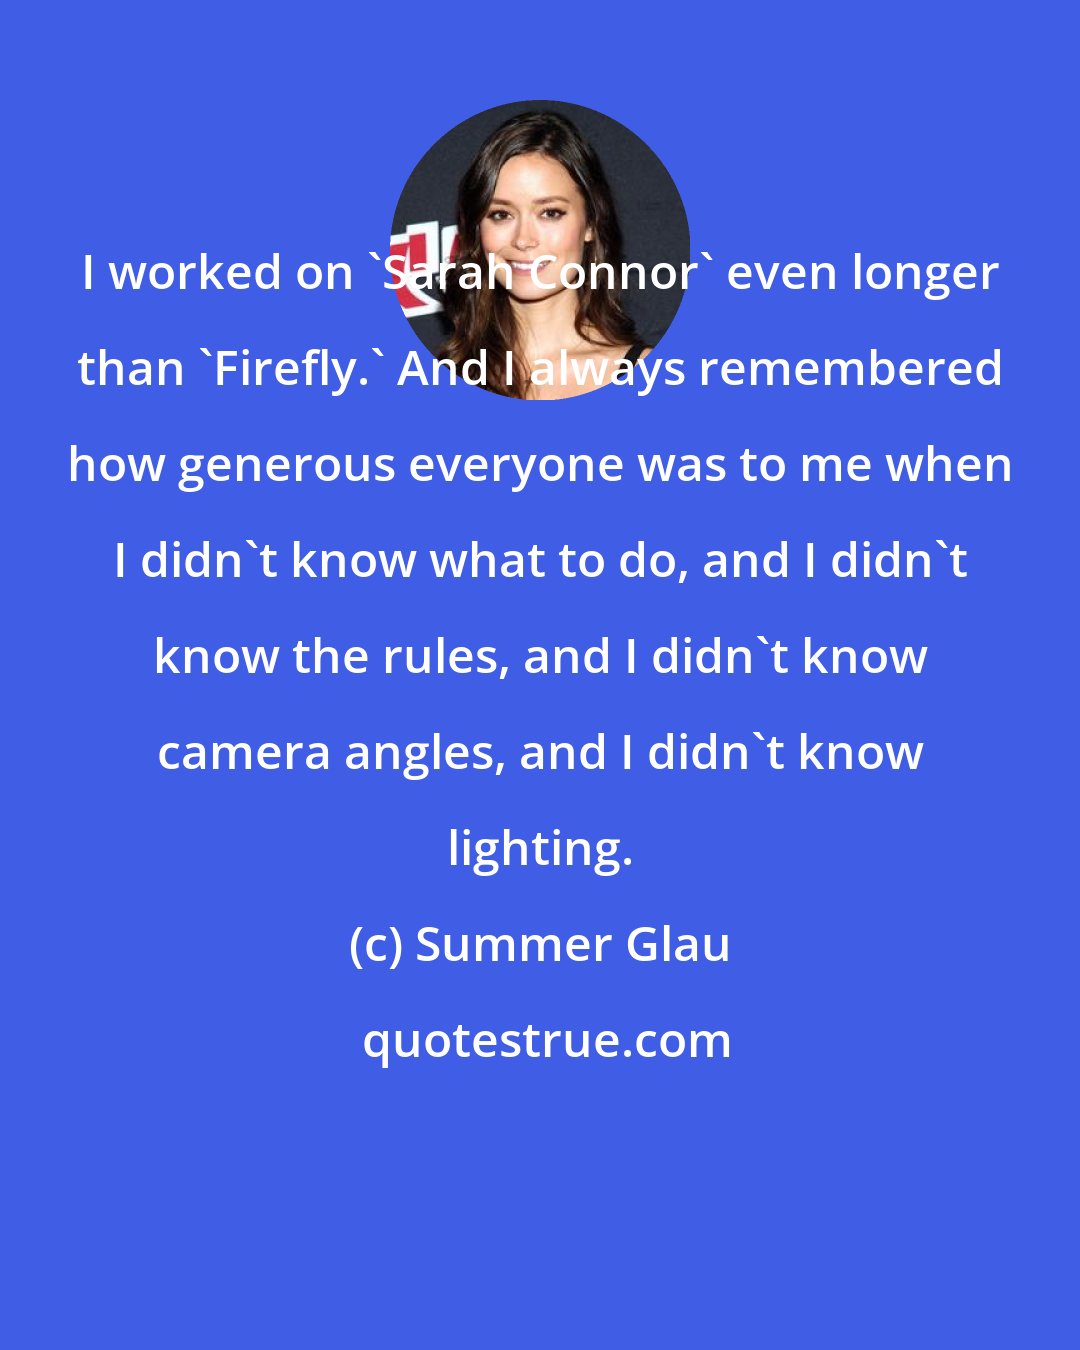 Summer Glau: I worked on 'Sarah Connor' even longer than 'Firefly.' And I always remembered how generous everyone was to me when I didn't know what to do, and I didn't know the rules, and I didn't know camera angles, and I didn't know lighting.